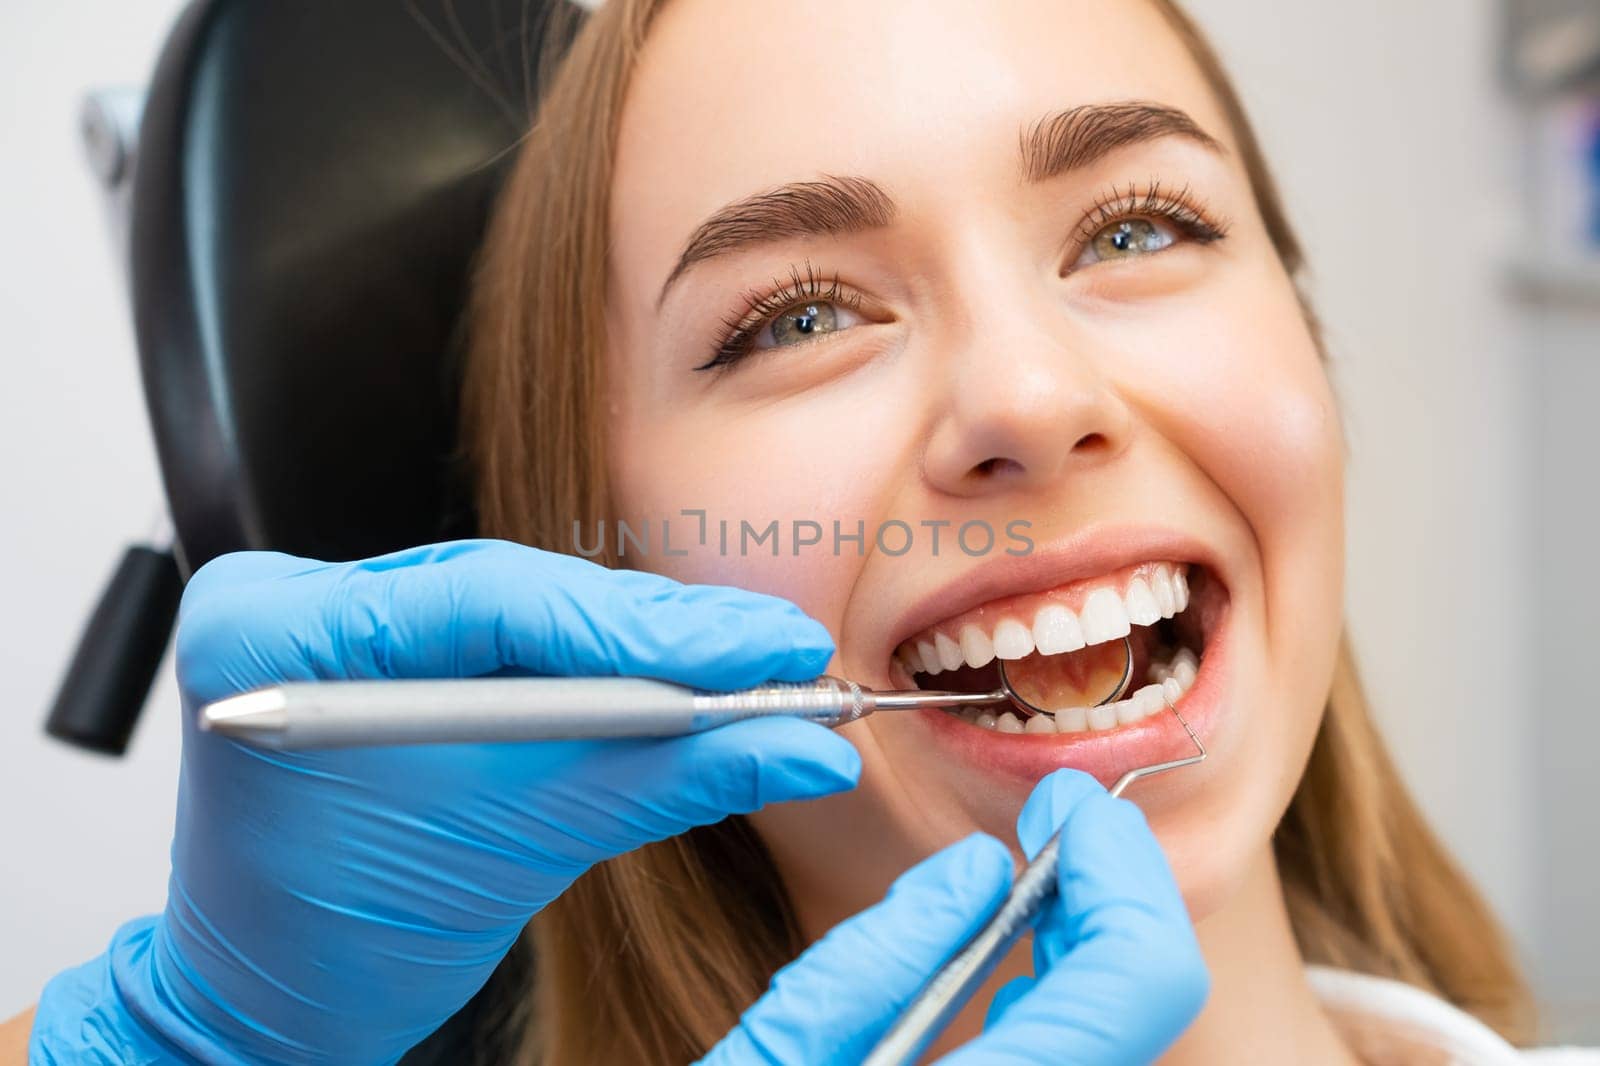 The dentist, wearing gloves, uses a small mirror and dental probe to inspect the patients teeth and gums